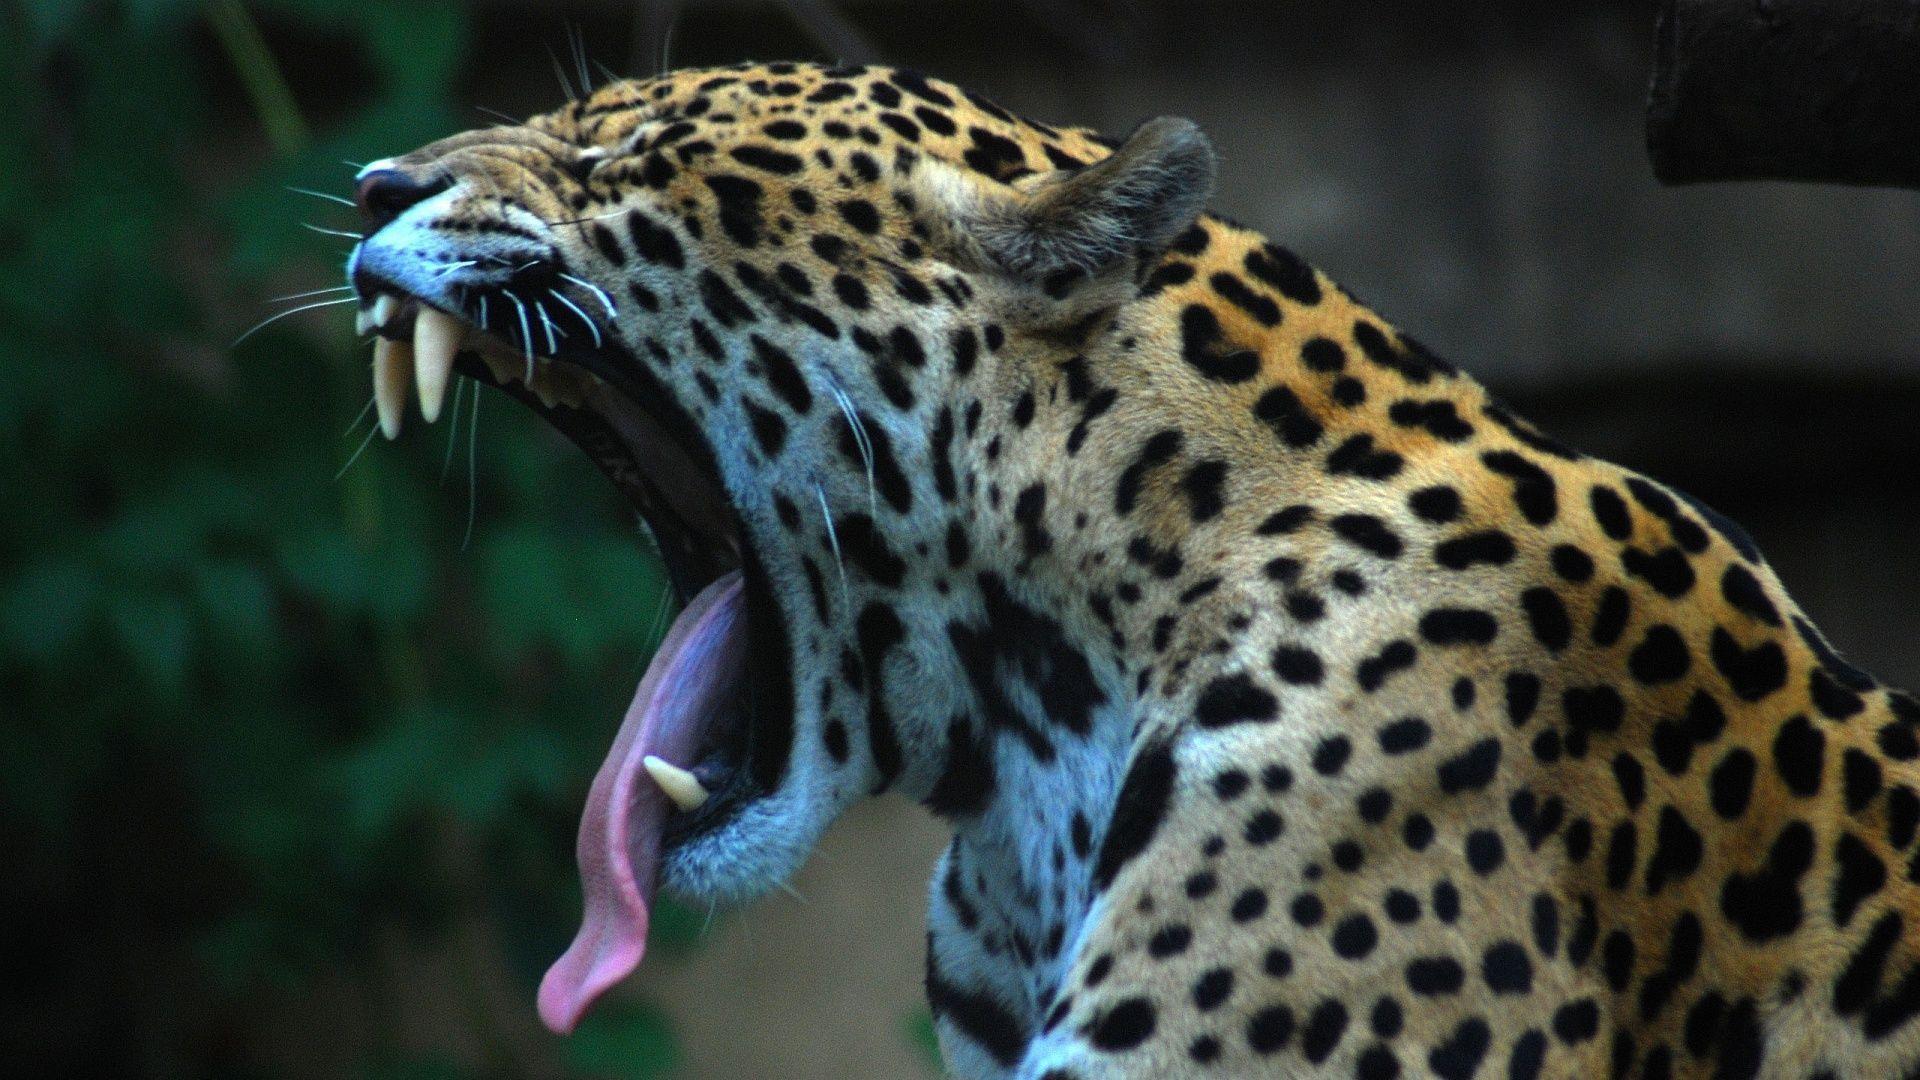 Leopard HD Image, Get Free top quality Leopard HD Image